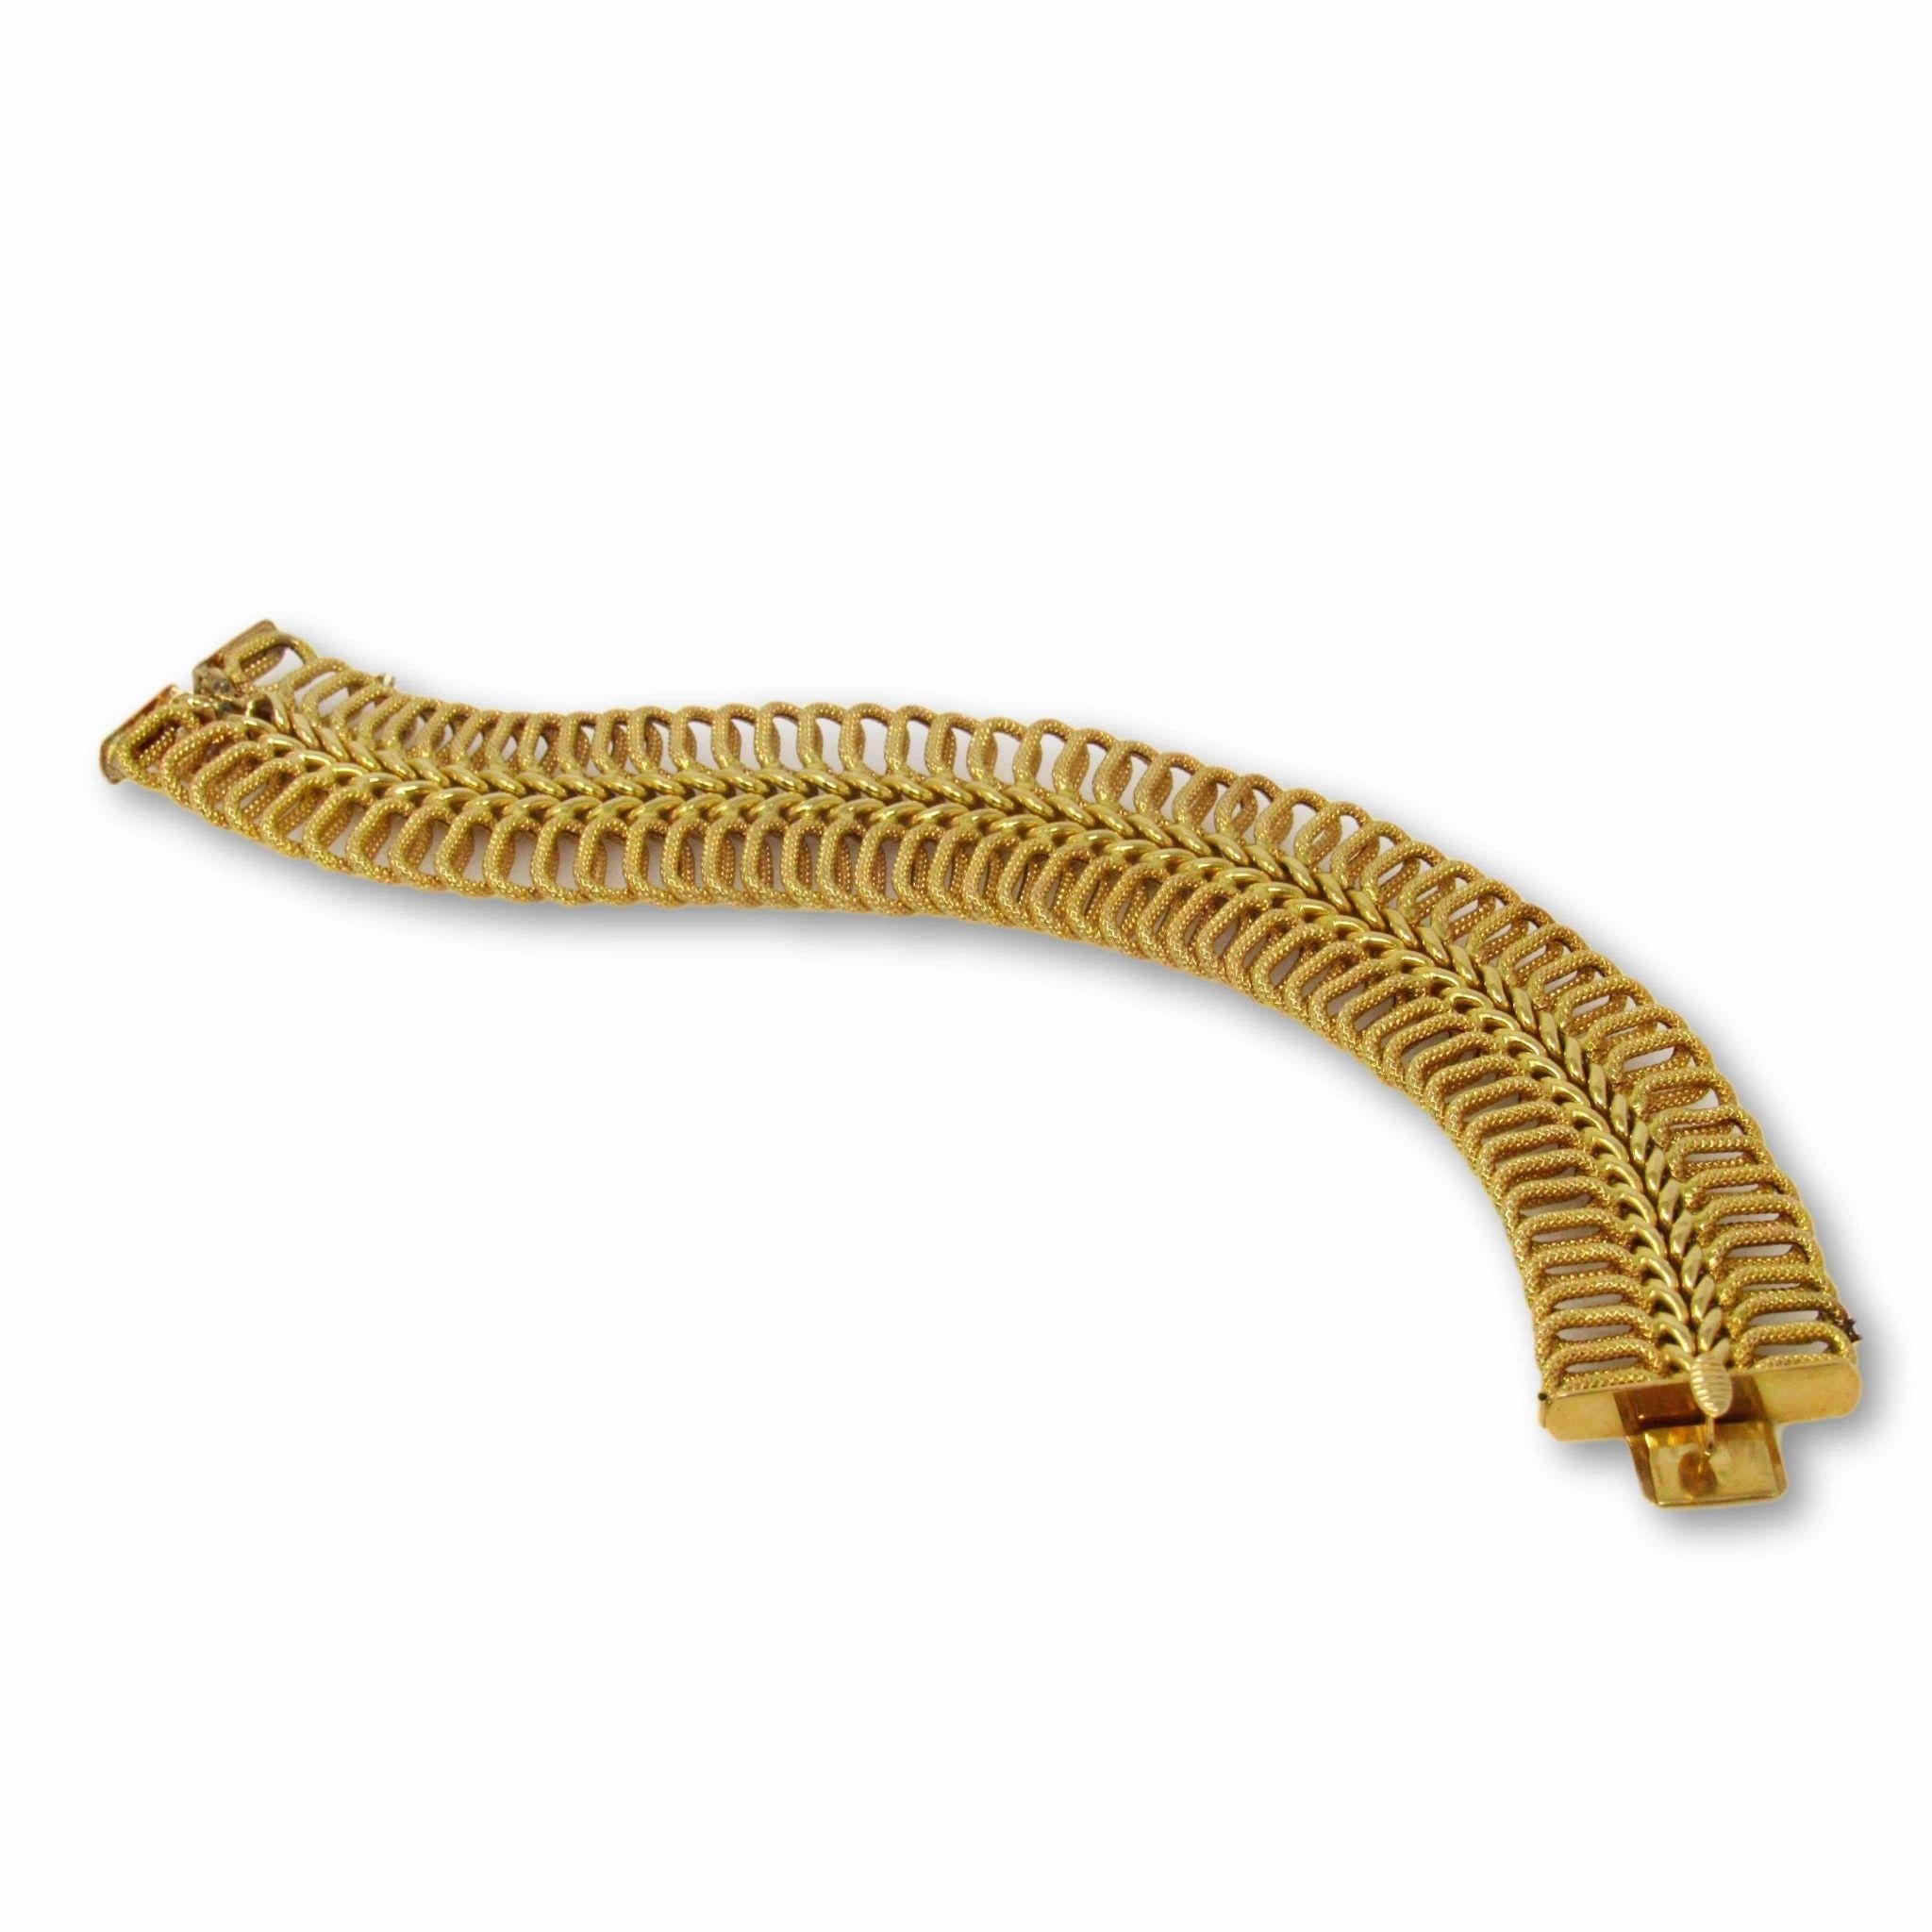 Textured Cartier of Italy bracelet that is constructed of 18k yellow gold

Ribbed design that creates unusual movement

7” long and 15/16